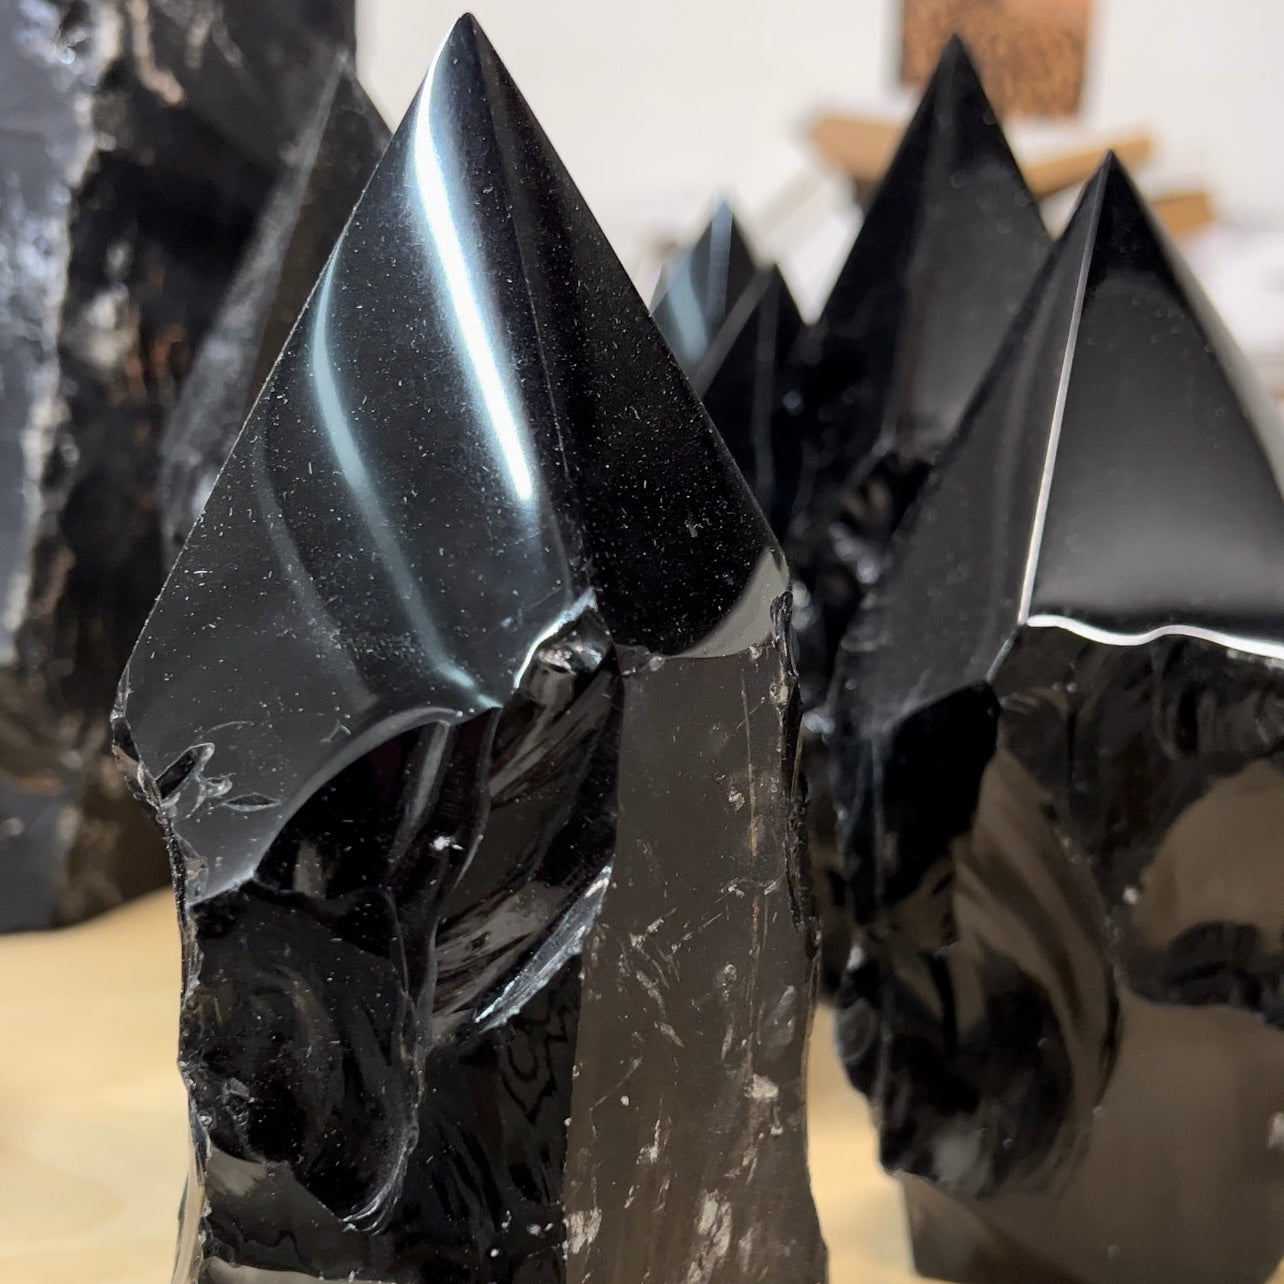 Big Black Obsidian point for Protection